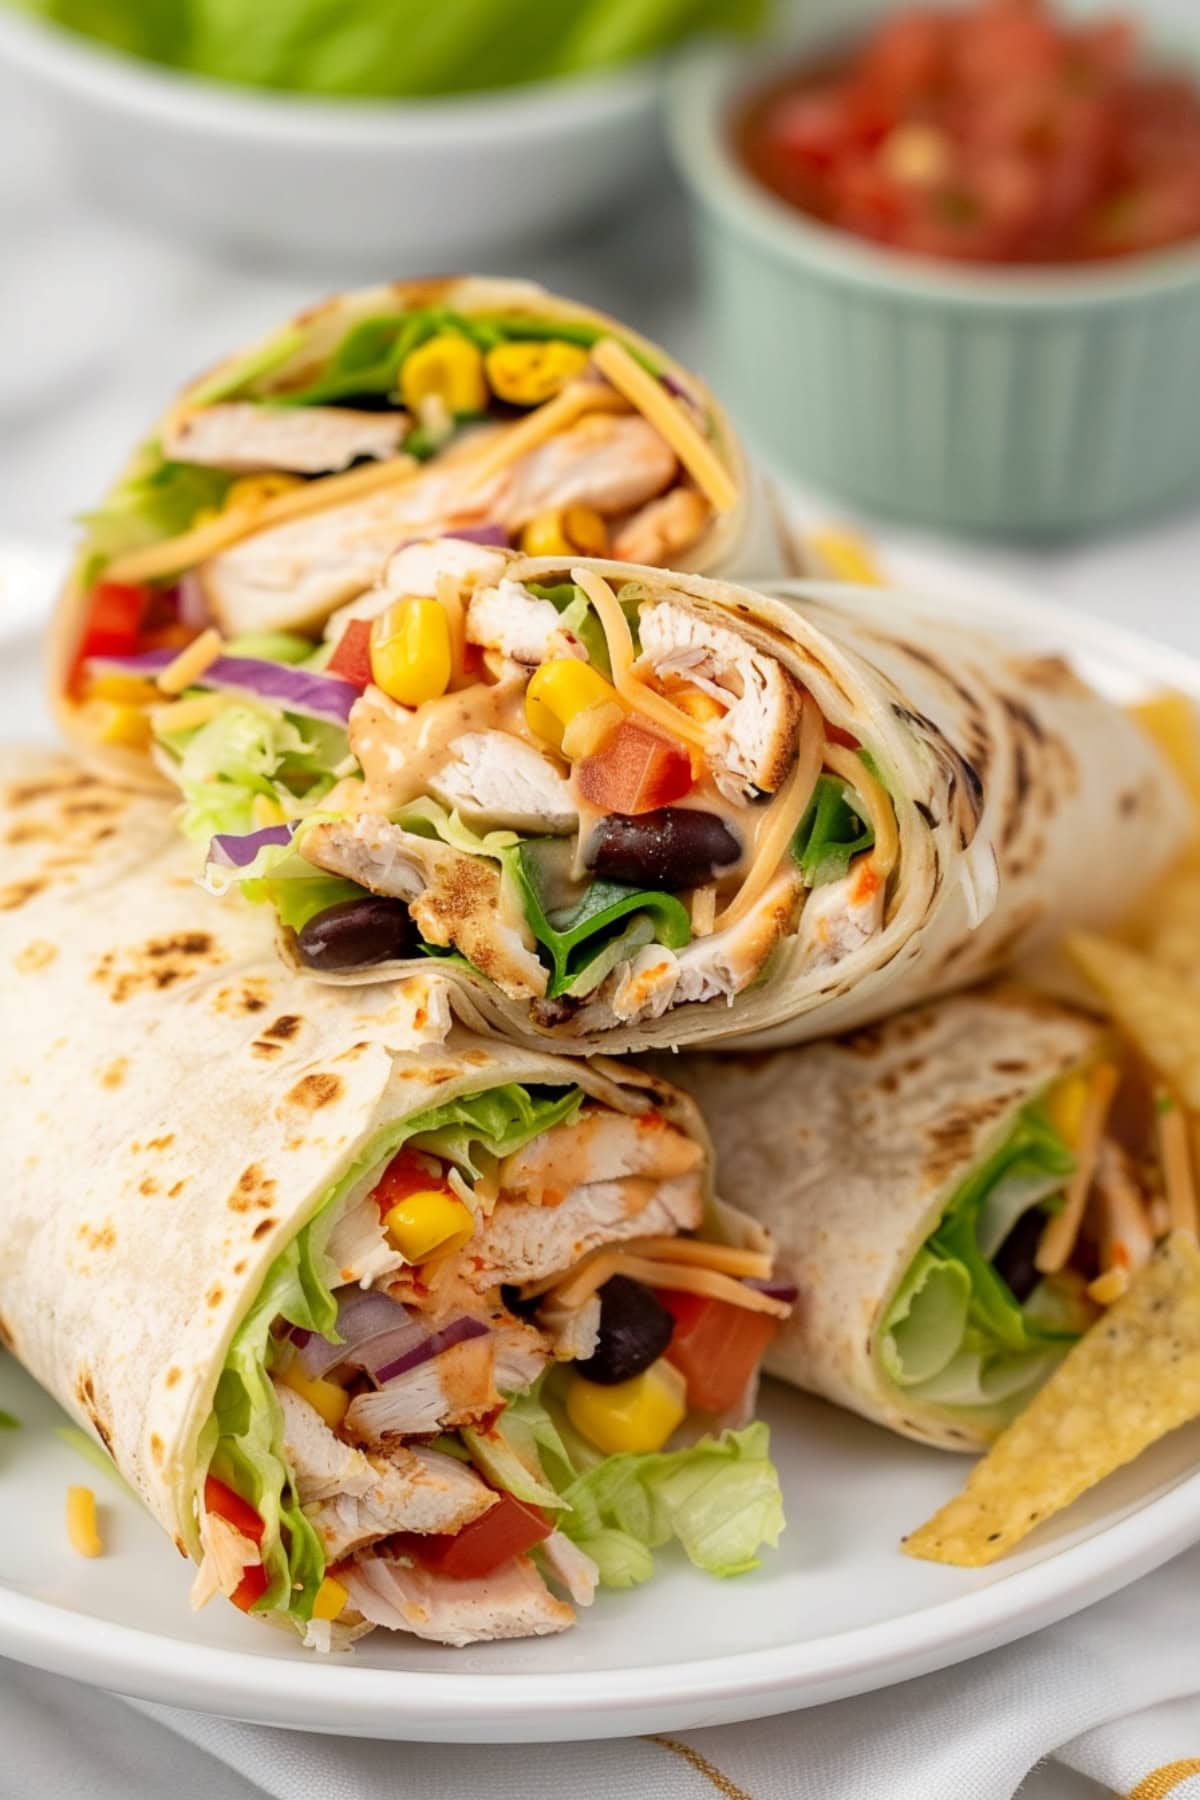 Southwest chicken wrap sliced in half served on a white plate